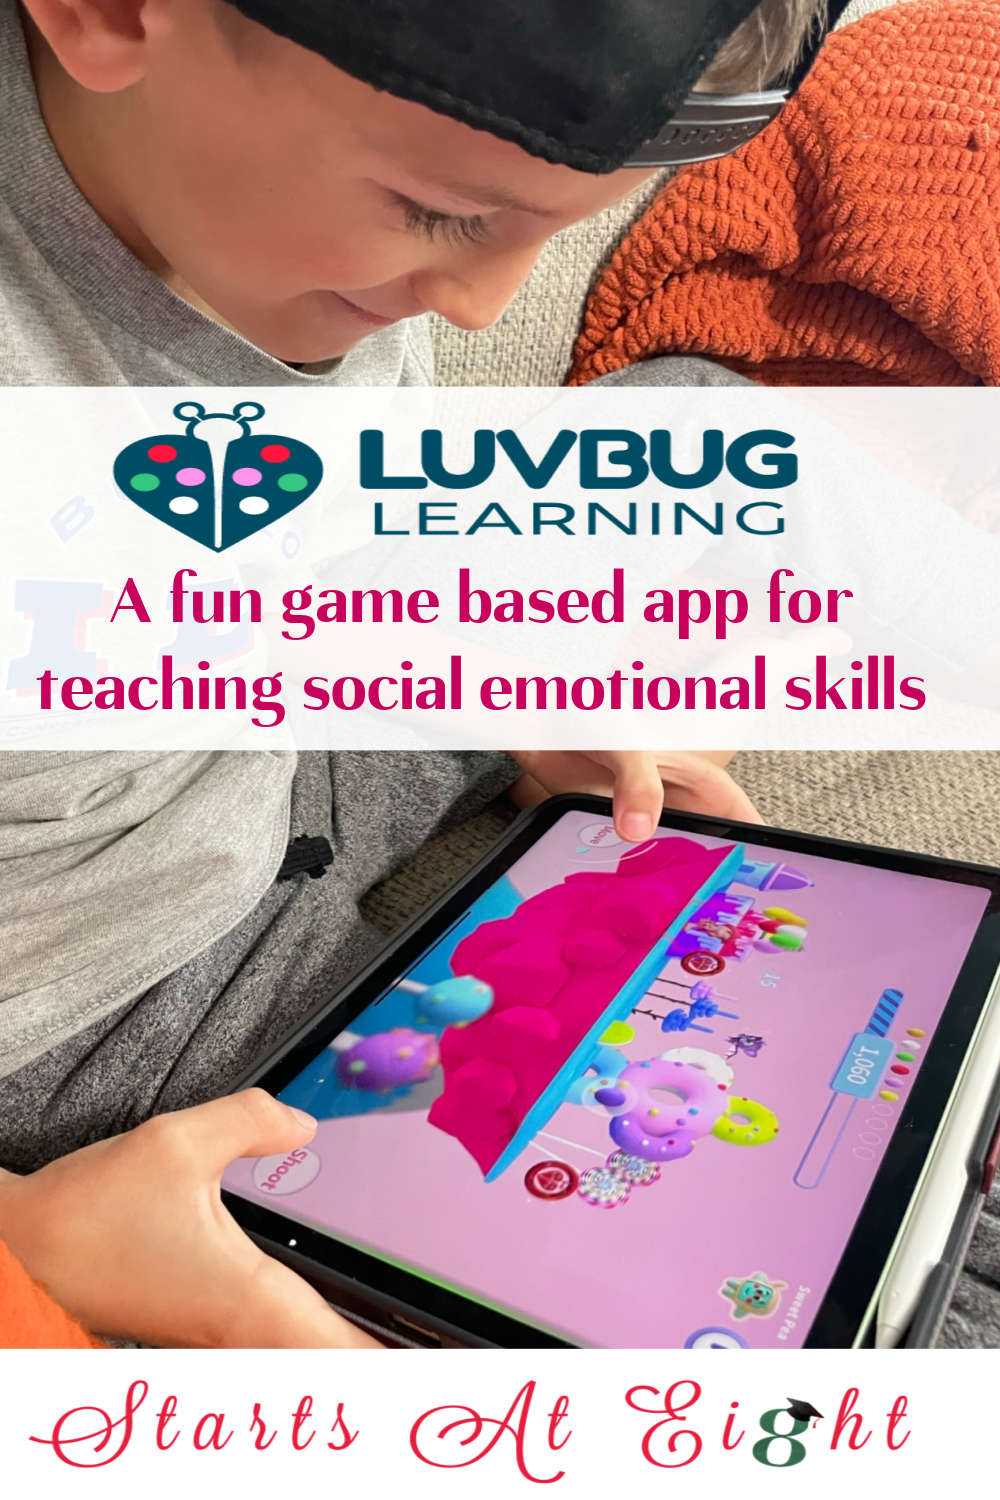 LuvBug Learning is a social emotional learning app whose main goal is teaching feelings to kids through engaging games and videos.